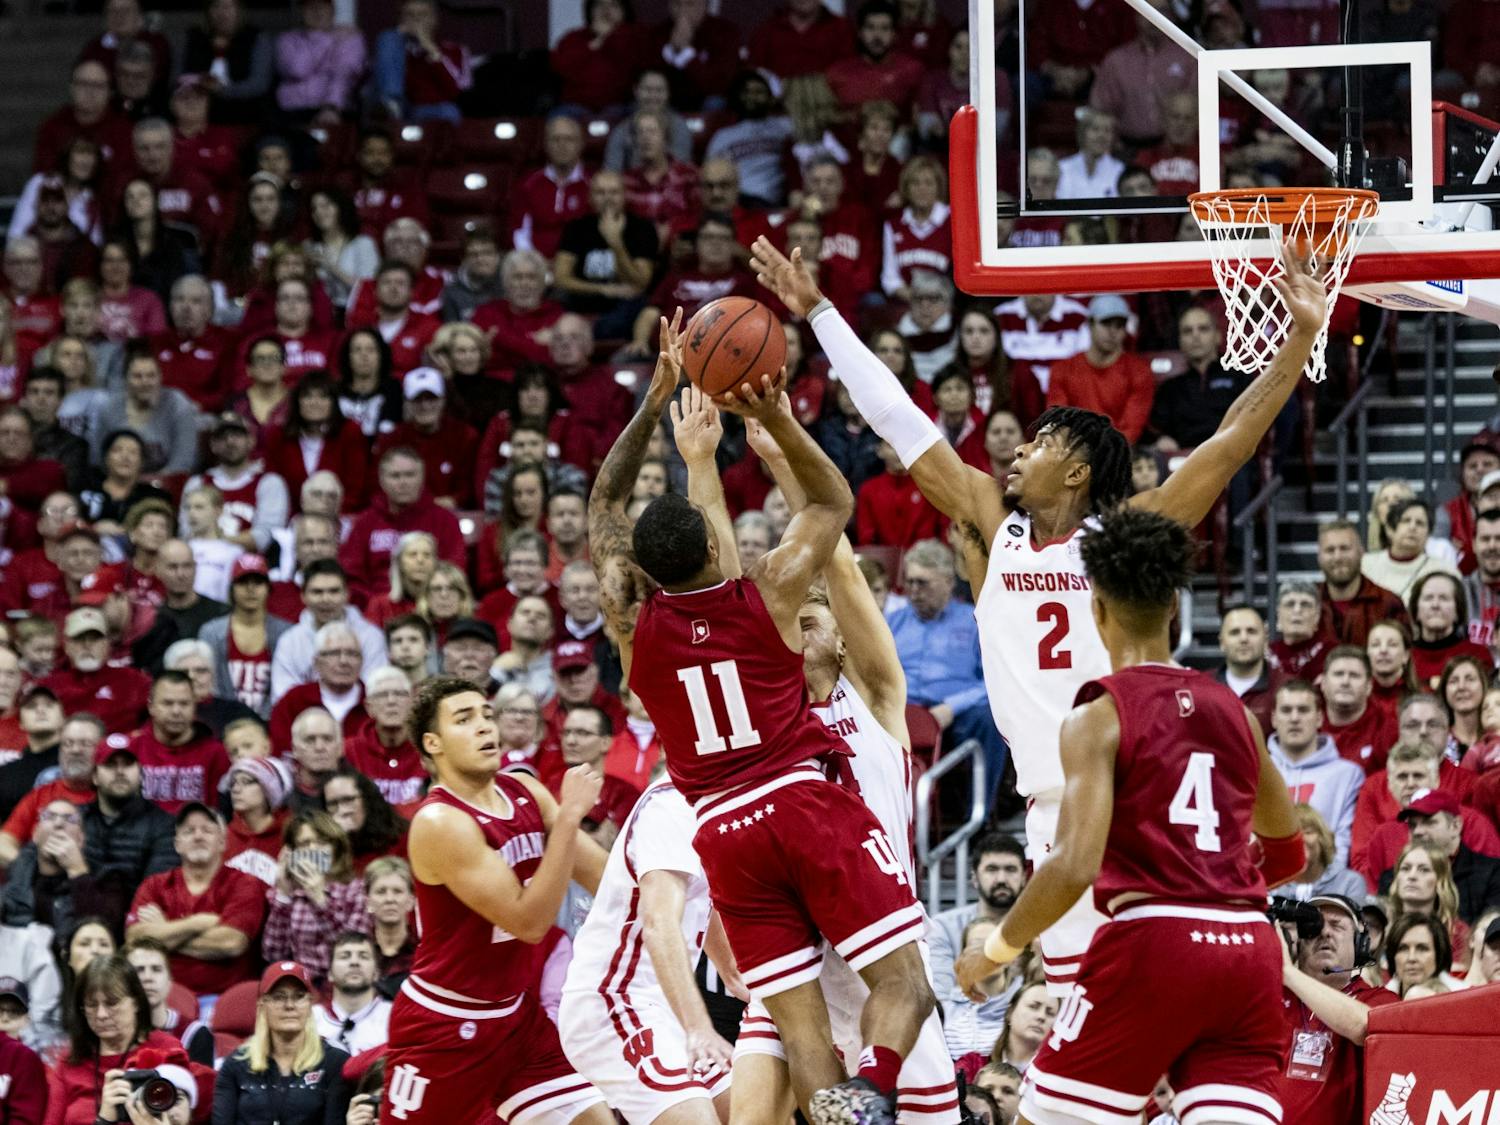 GALLERY: IU men's basketball dismantled by Wisconsin 84-64